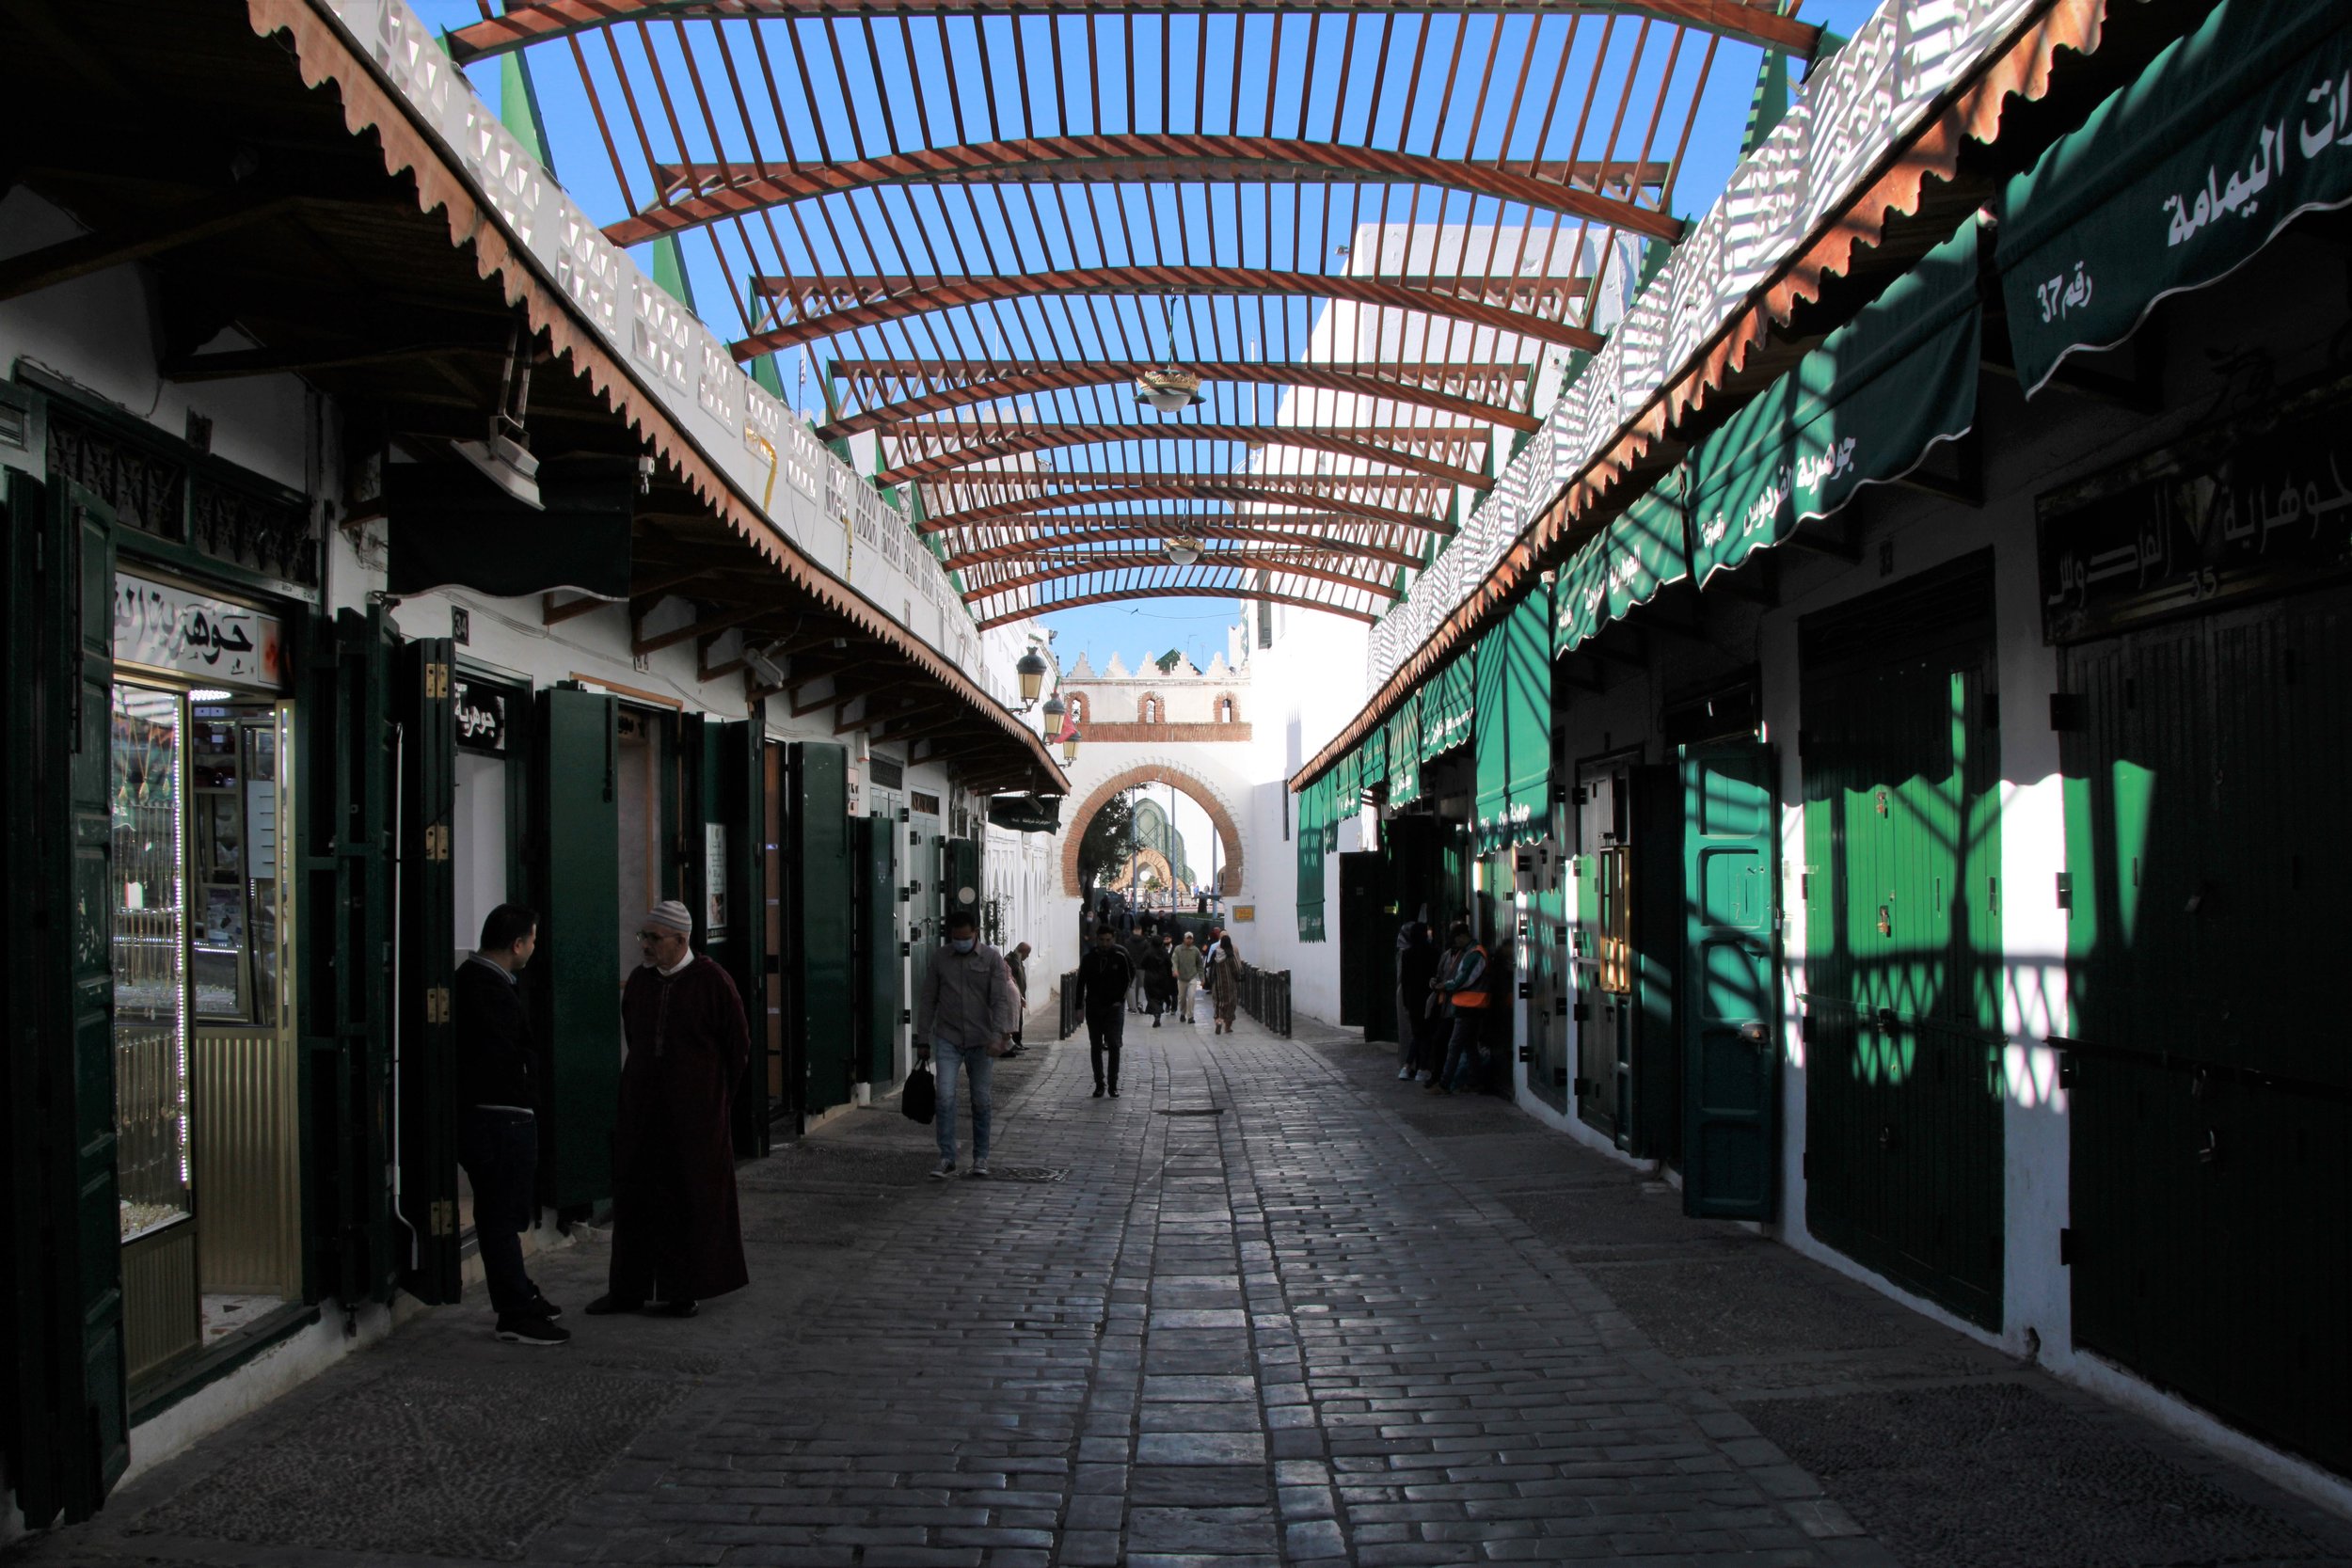  PICTURED: The jewelry souk in the old medina of Tétouan, shaded from the noonday sun. PC: Andrew Corbley © 